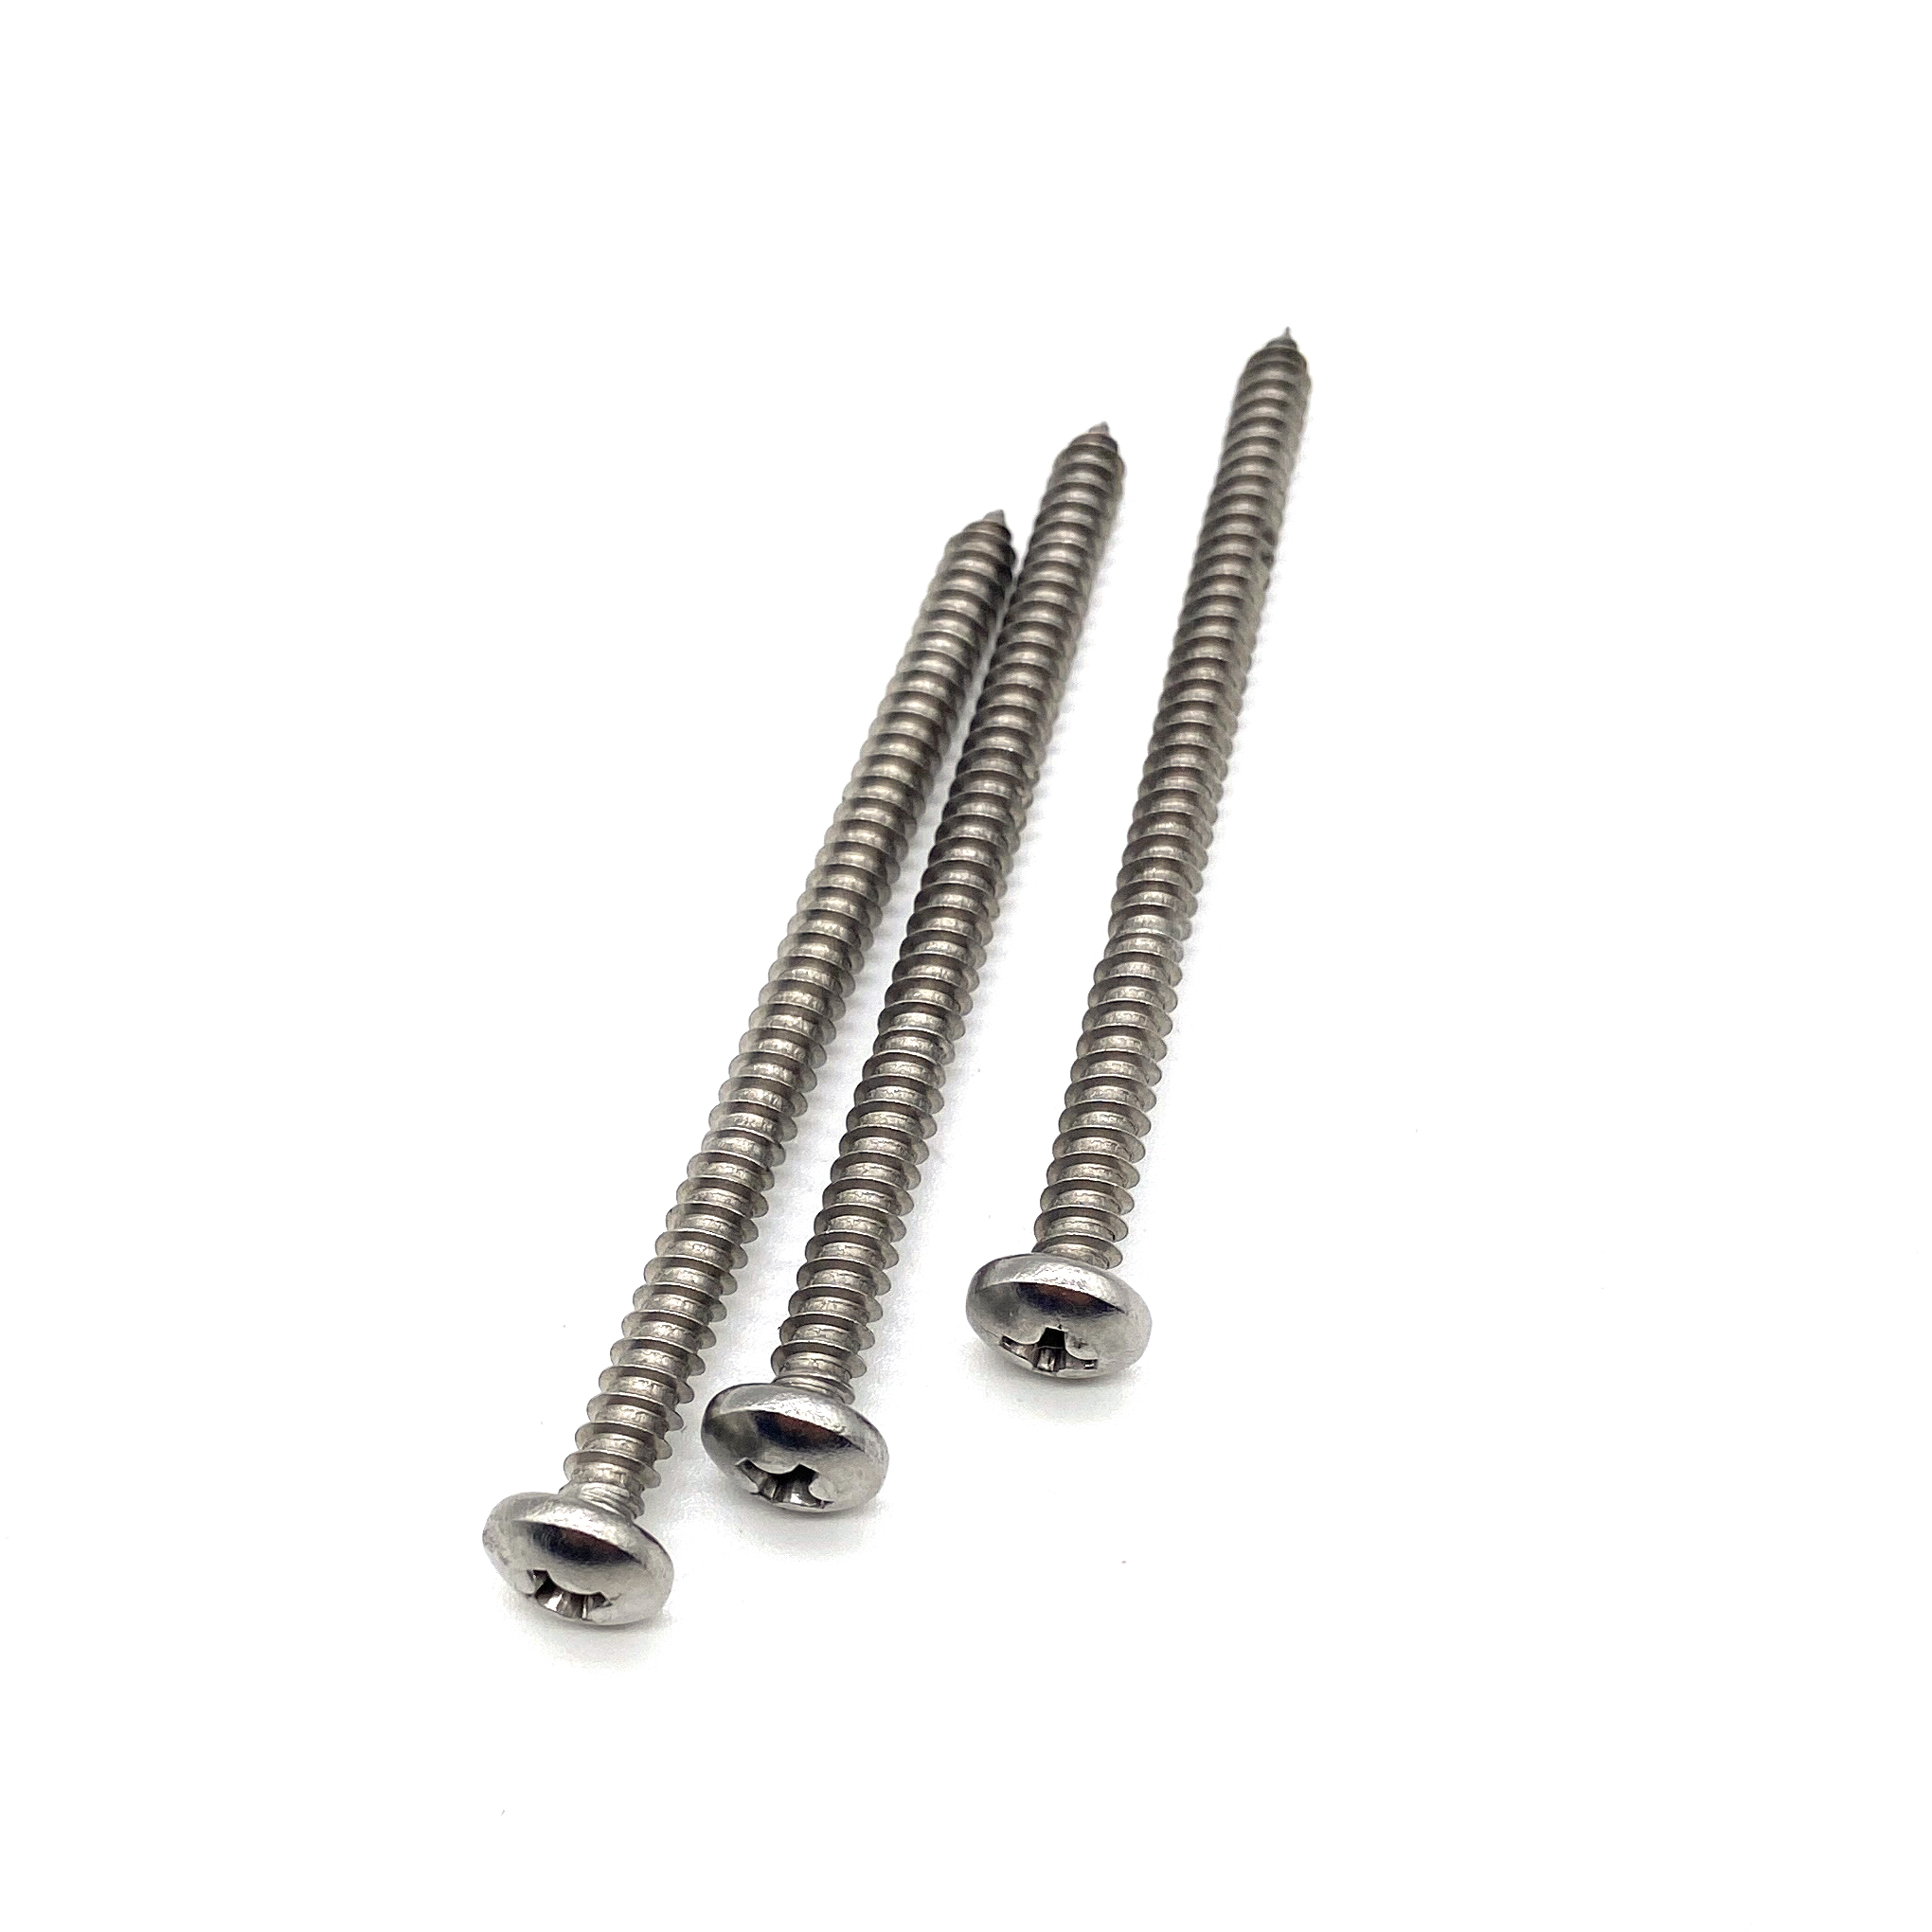 Astm A574 M5 Cross Flat Head Deck 316 Stainless Steel Self Tapping Screw